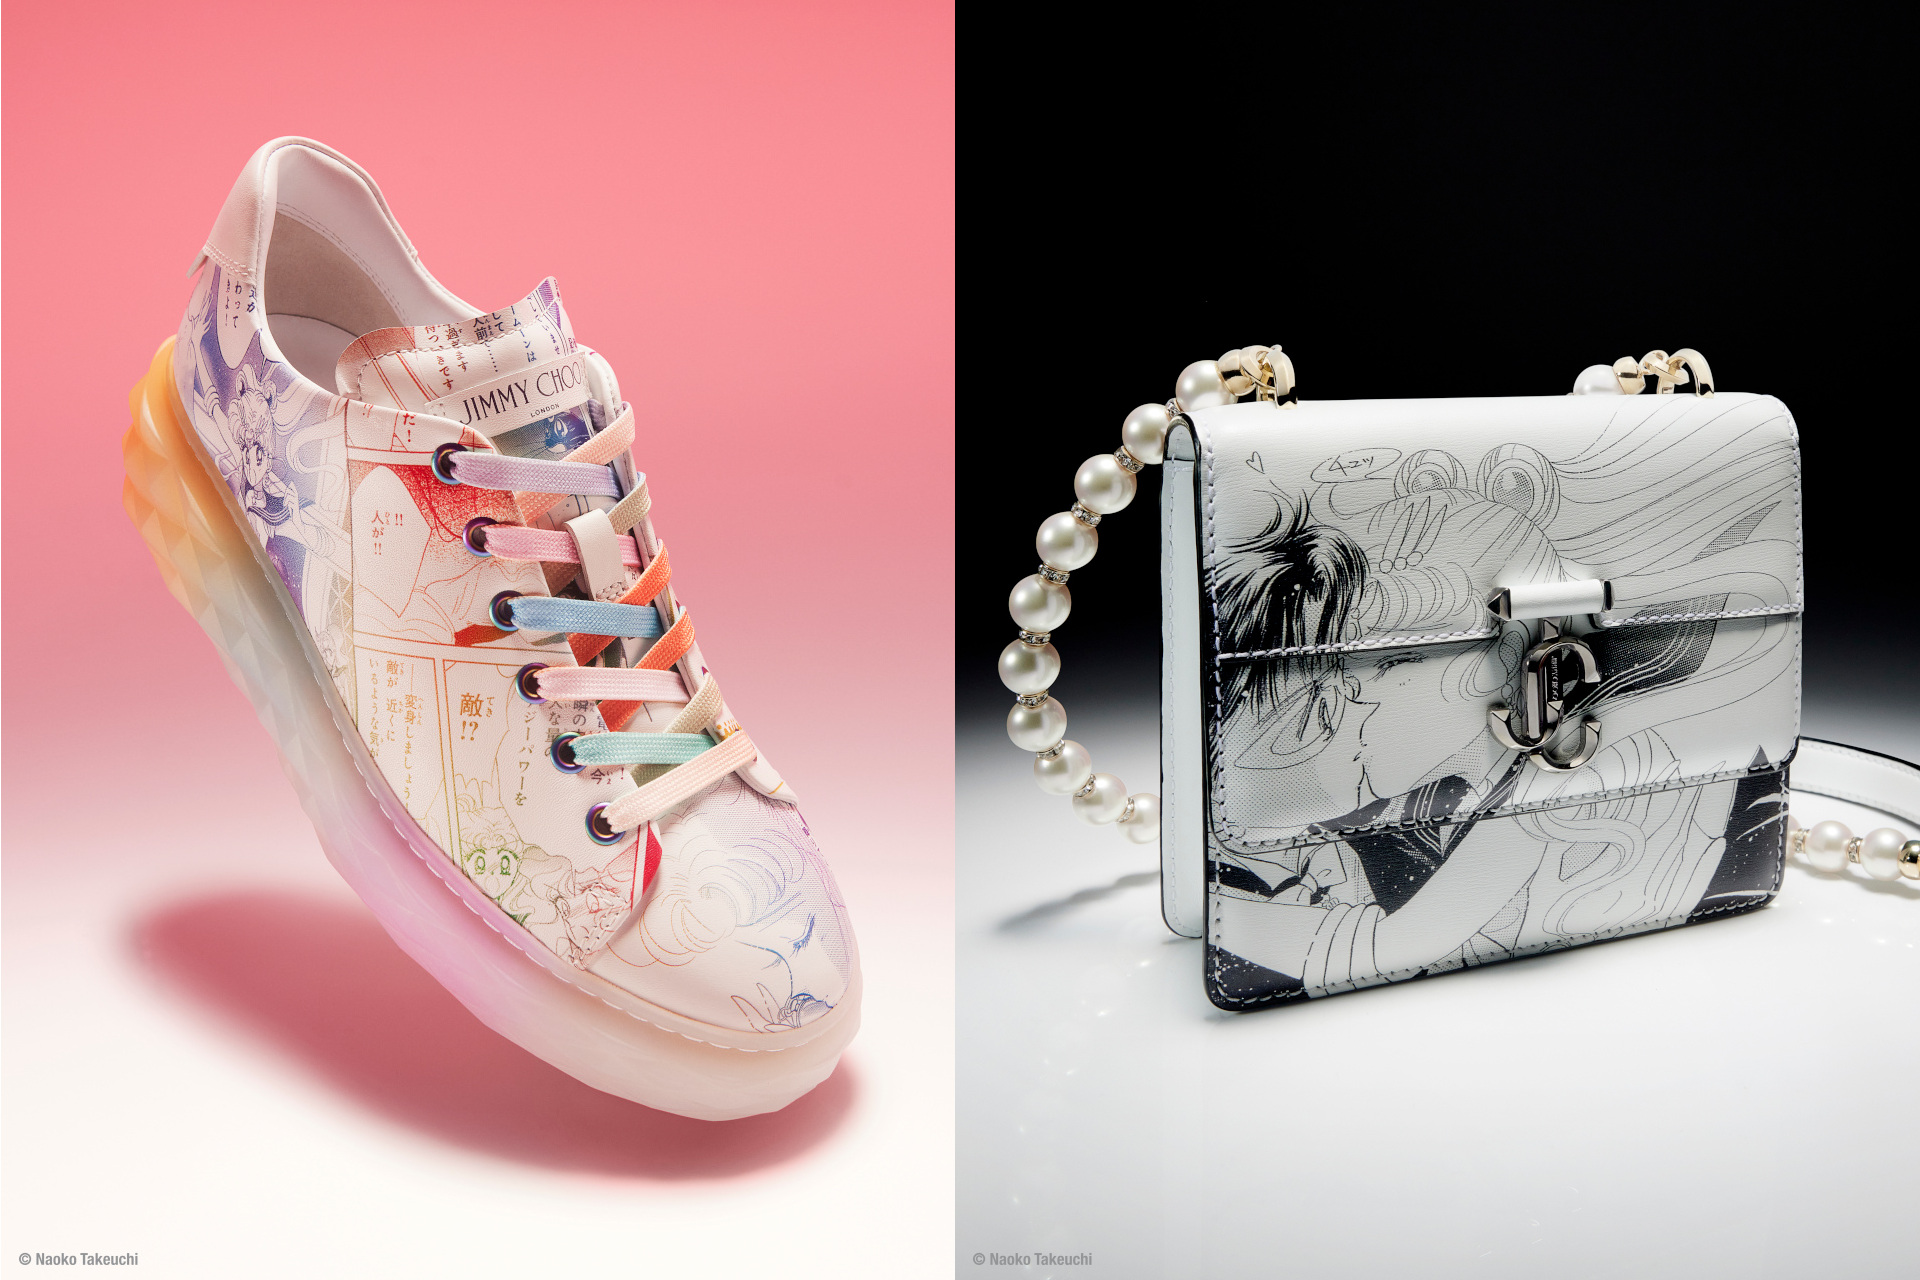 which shoe from the sailor moon & jimmy choo collab is your